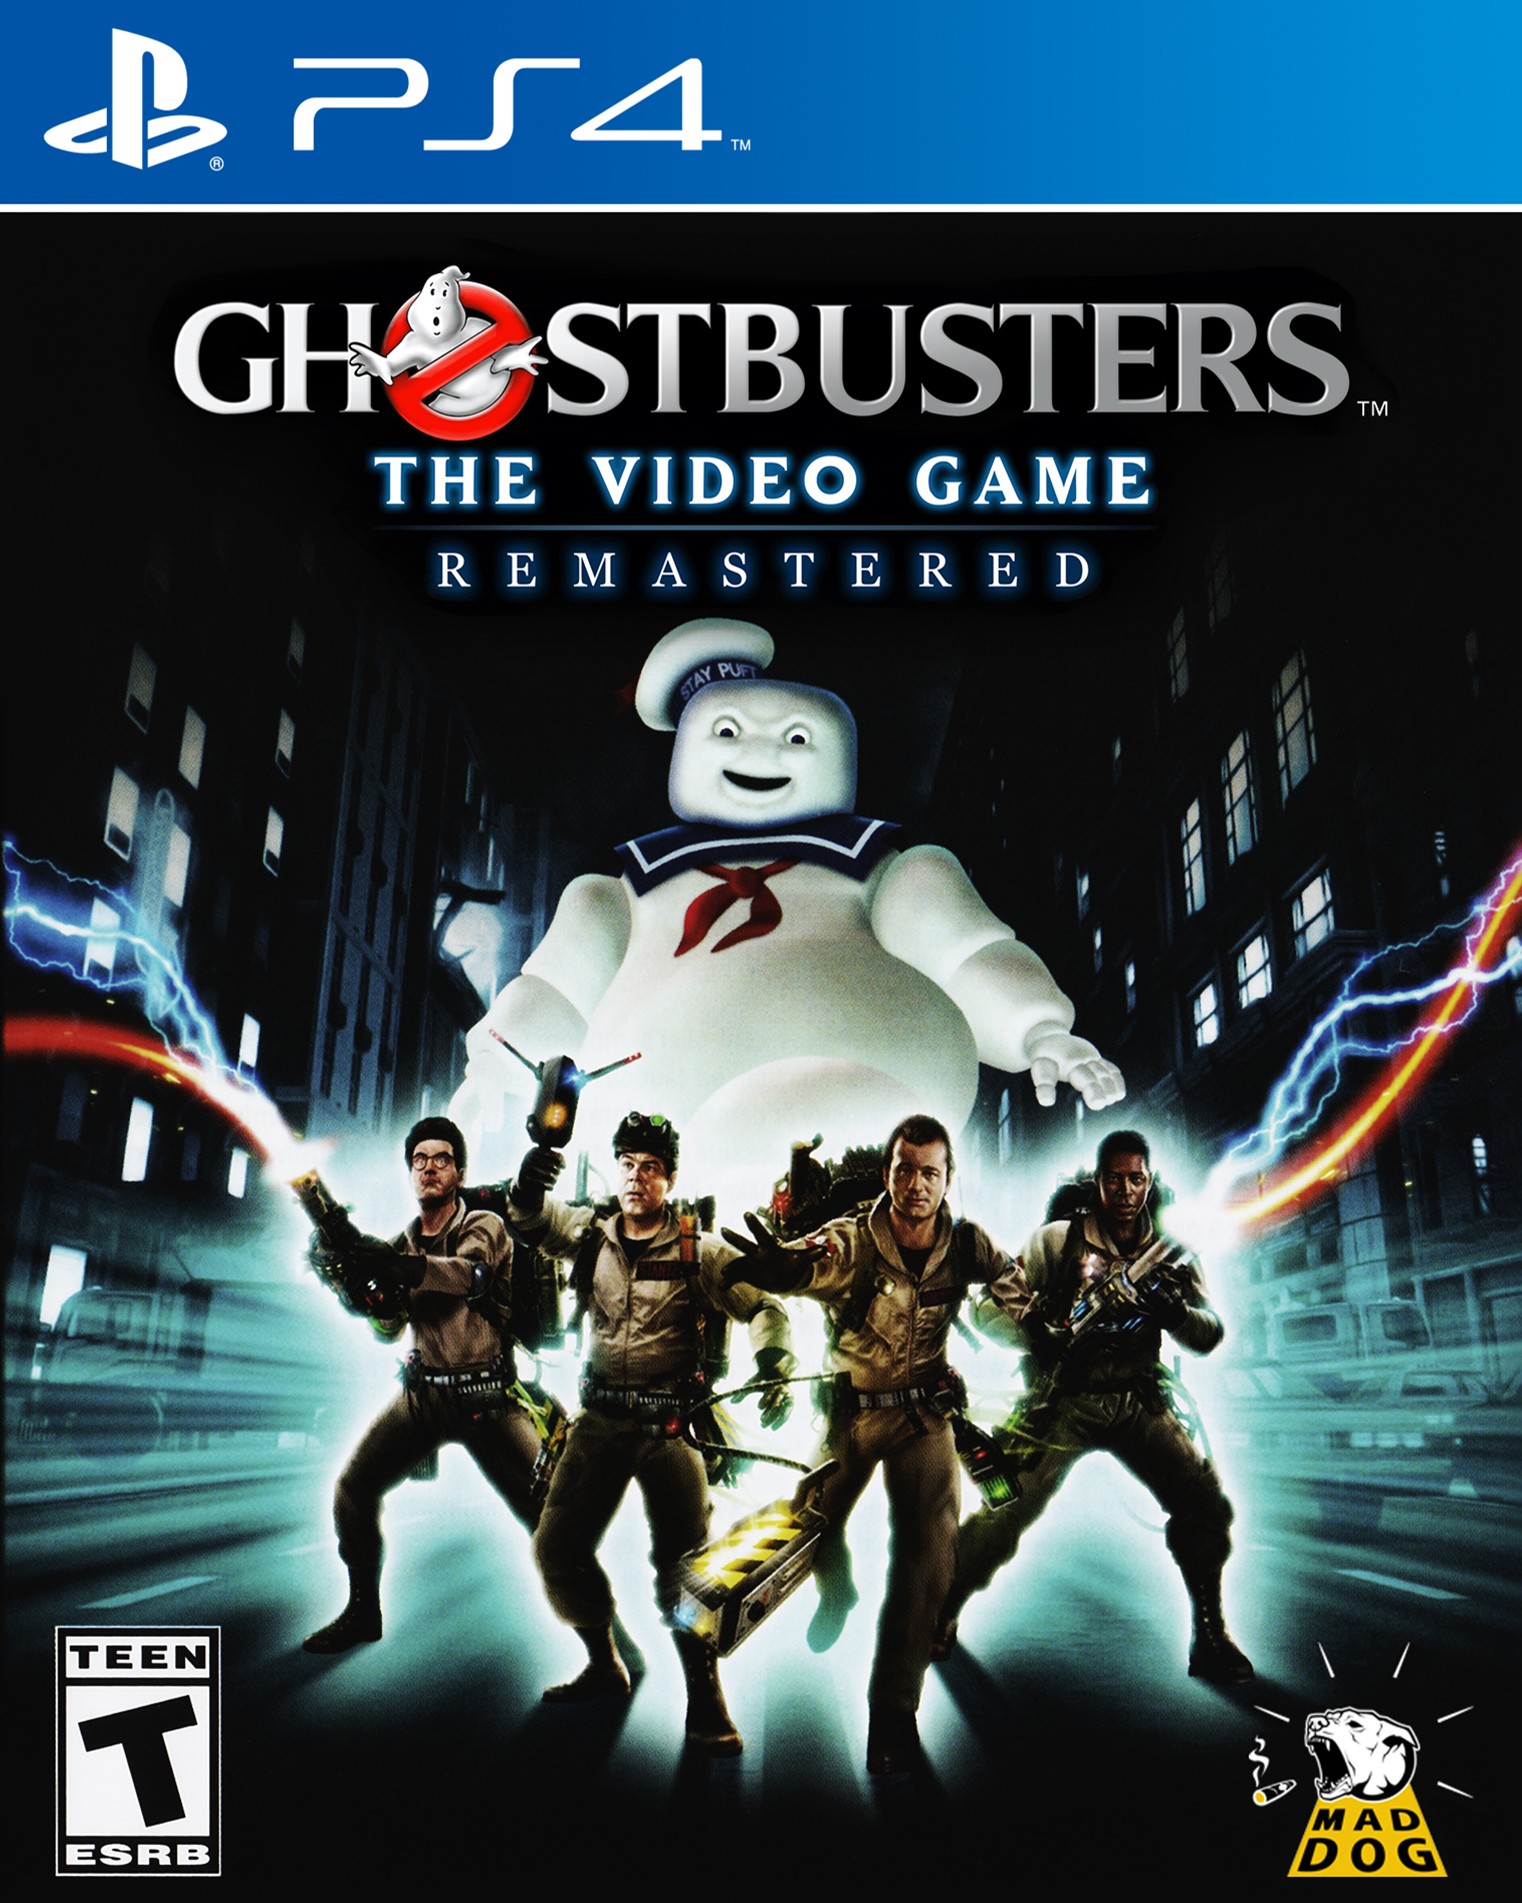 'Ghostbusters The Video Game: Remastered'